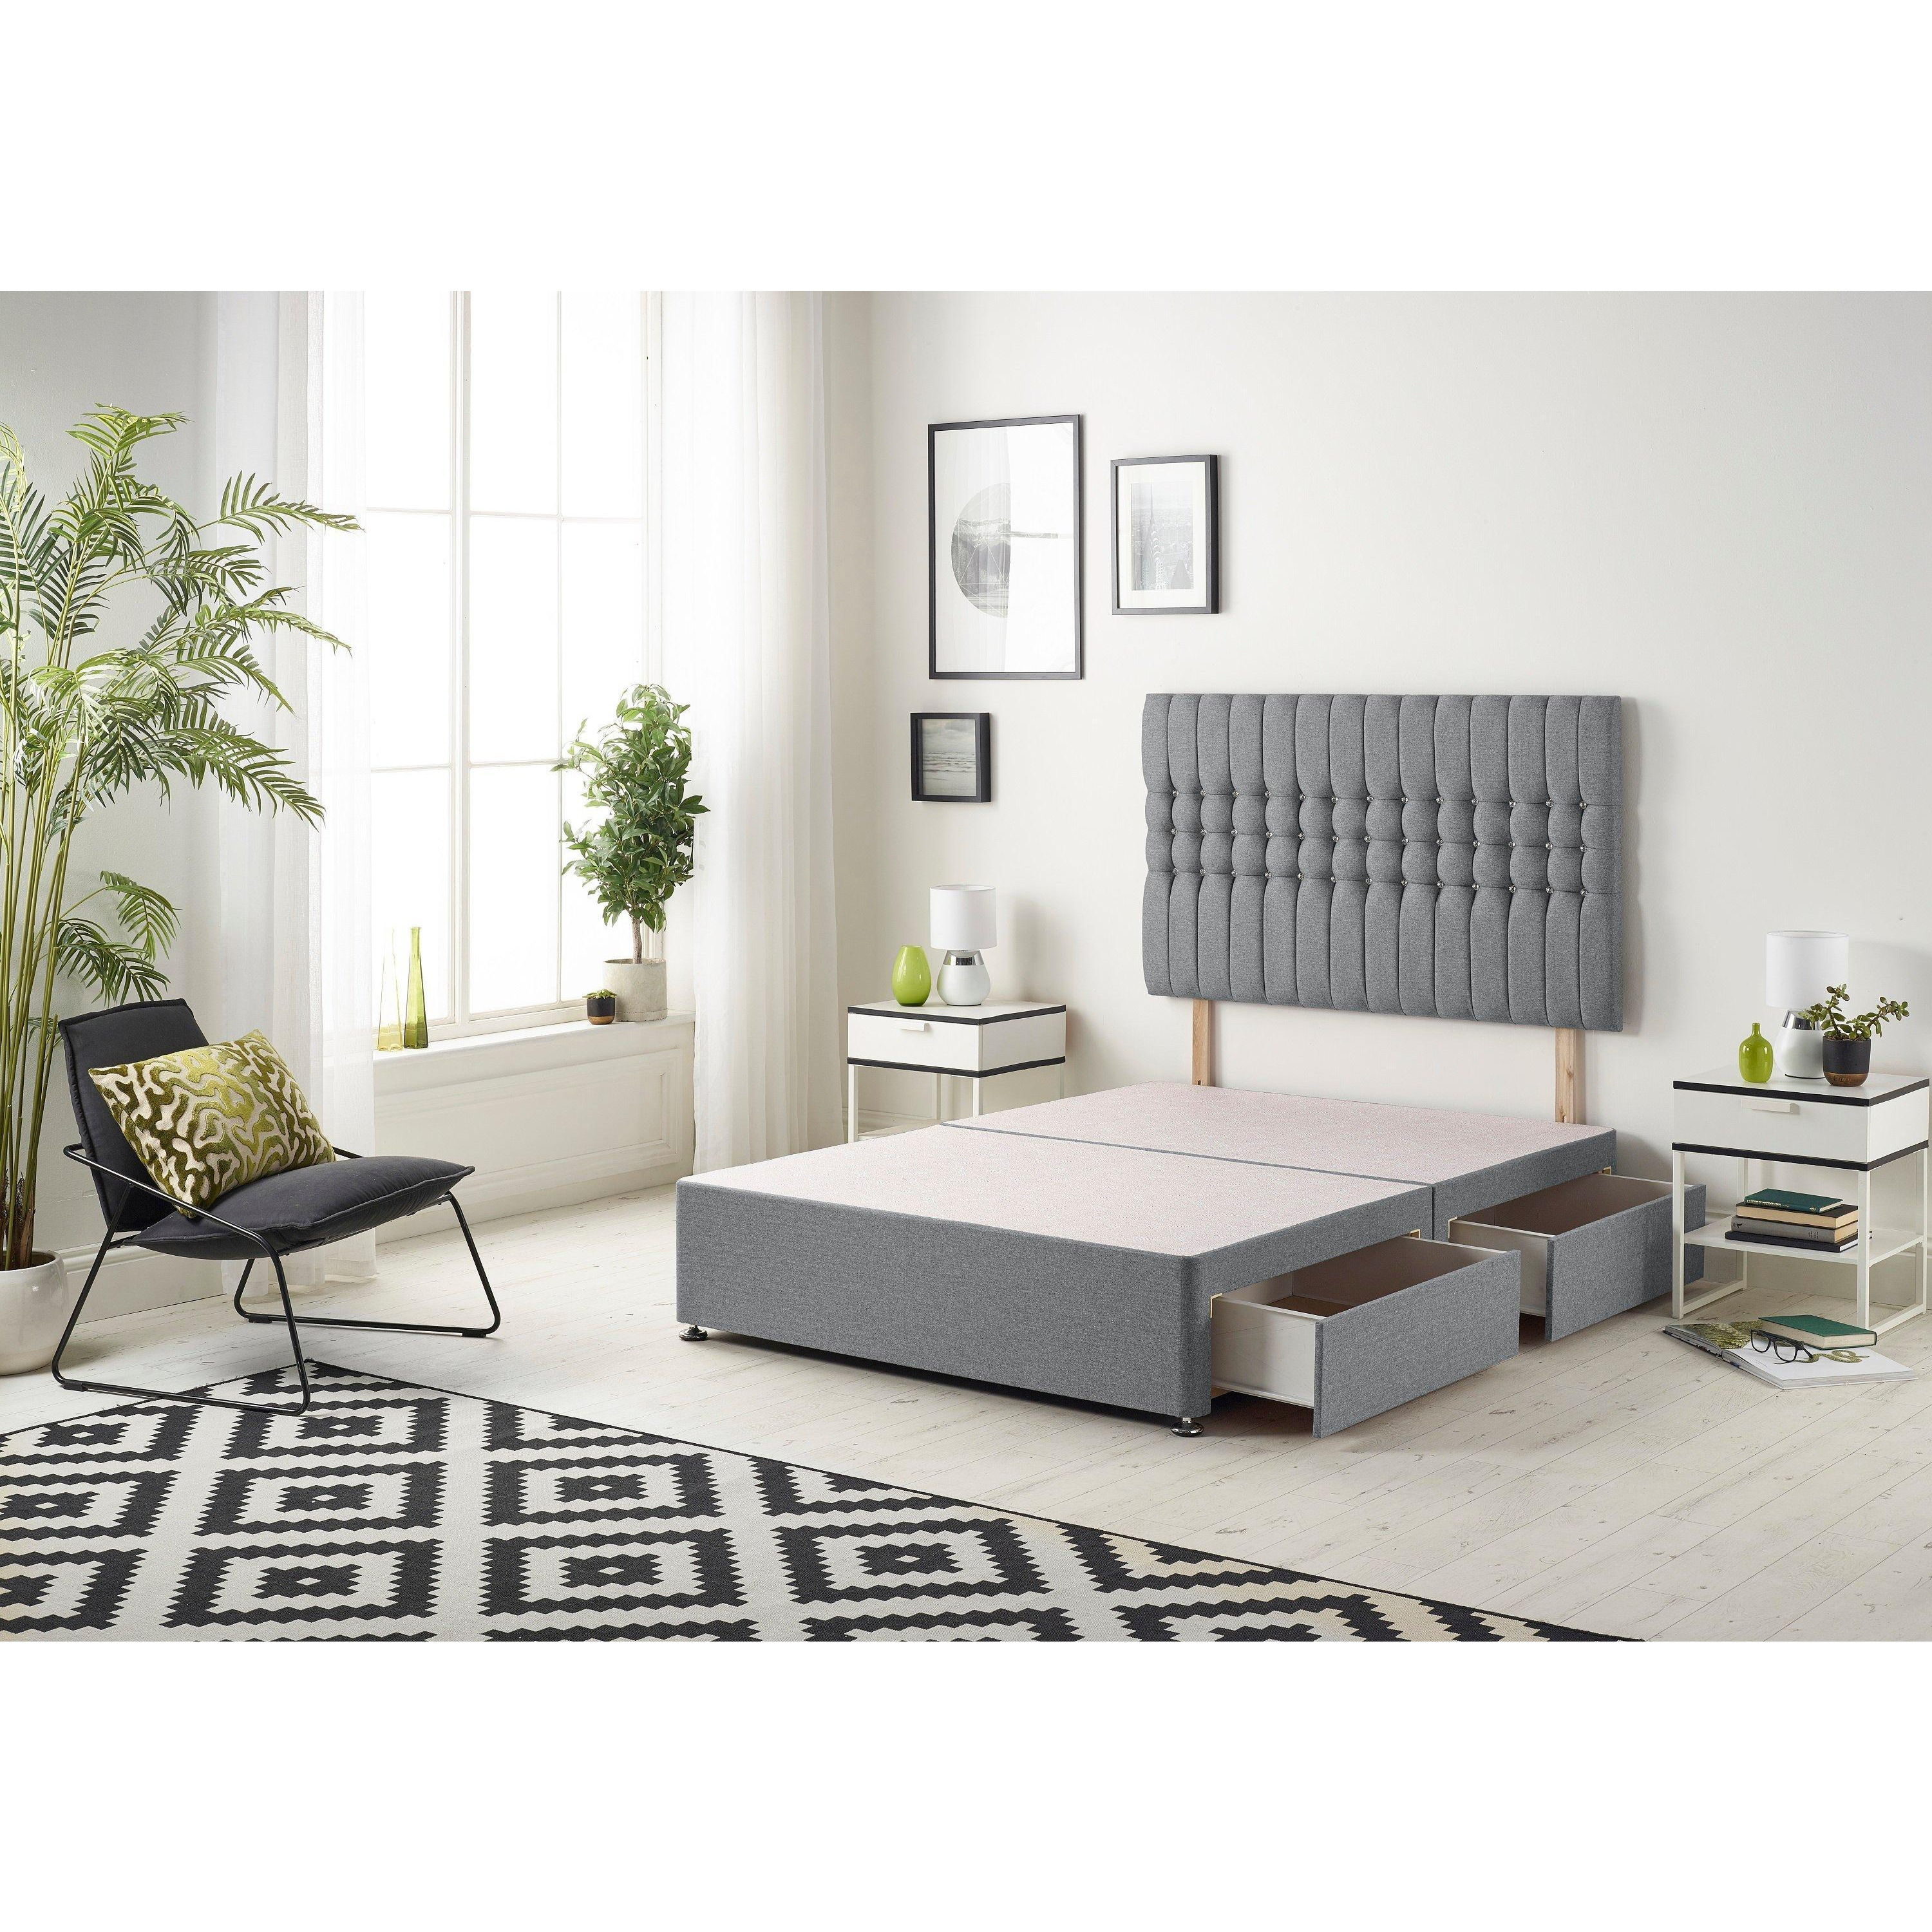 Galaxy Divan Bed Base With 2 Drawers and Headboard Plush - image 1